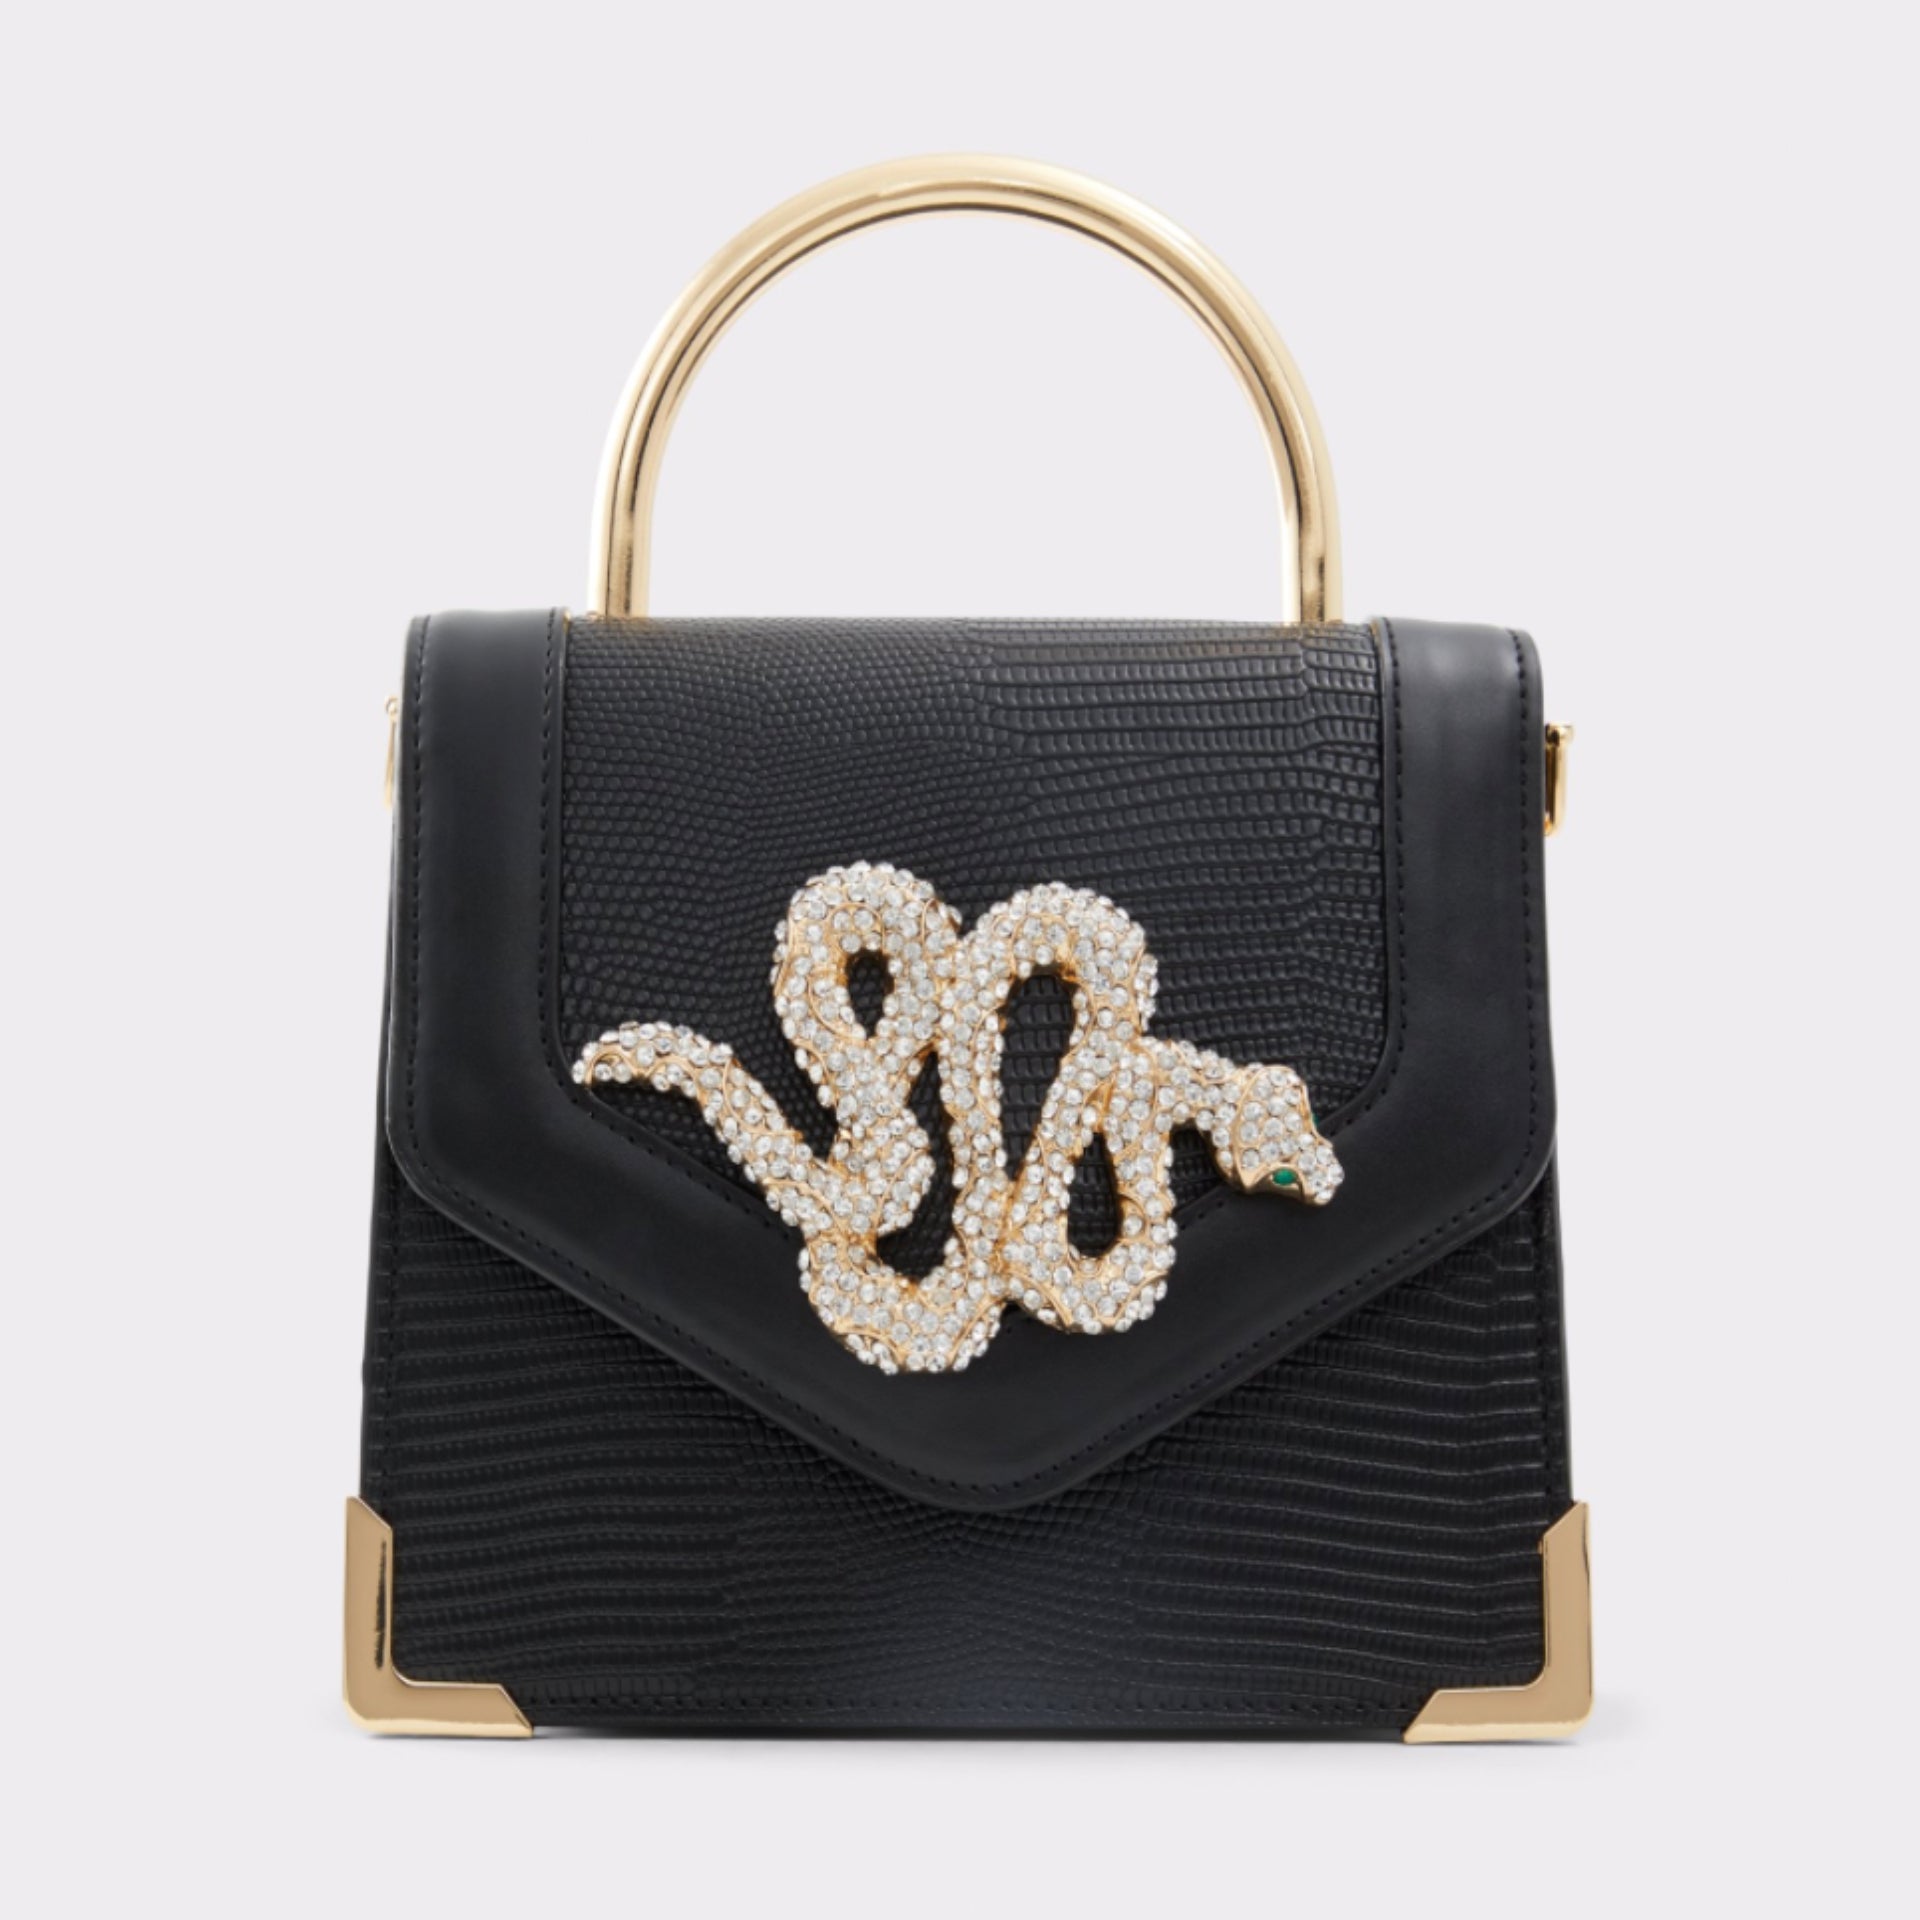 20 Handbags You Can't Do New Year's Eve Without